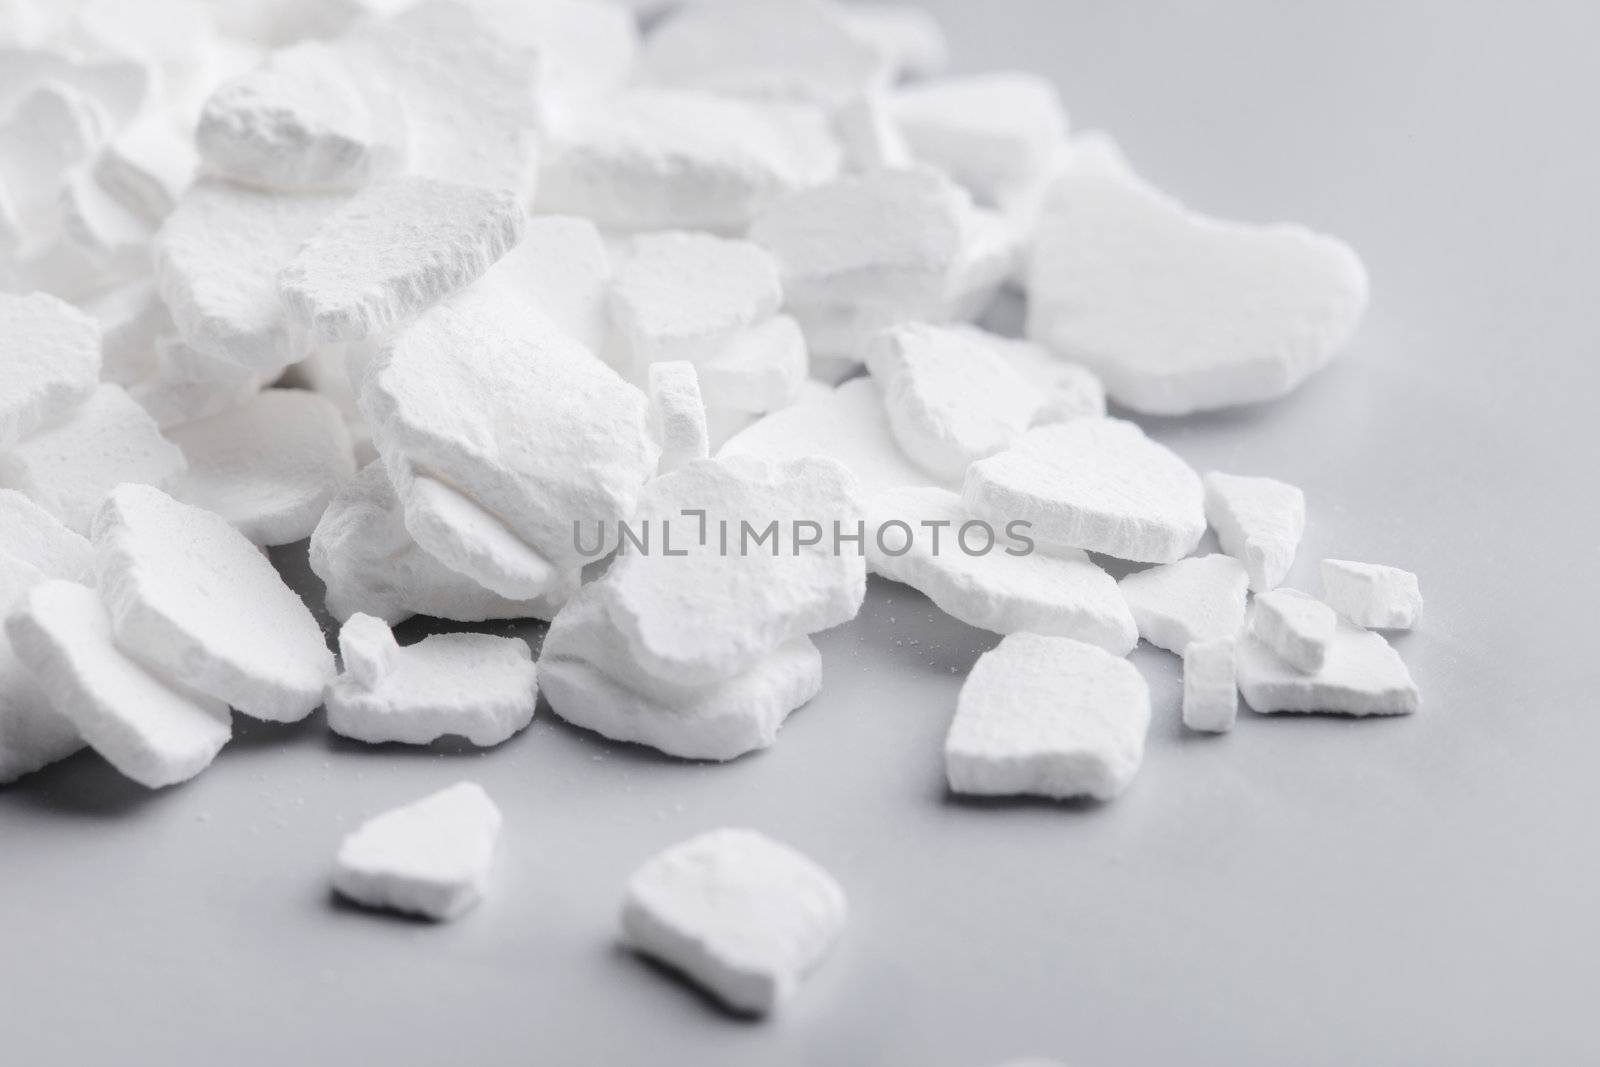 Calcium Chloride by Stocksnapper